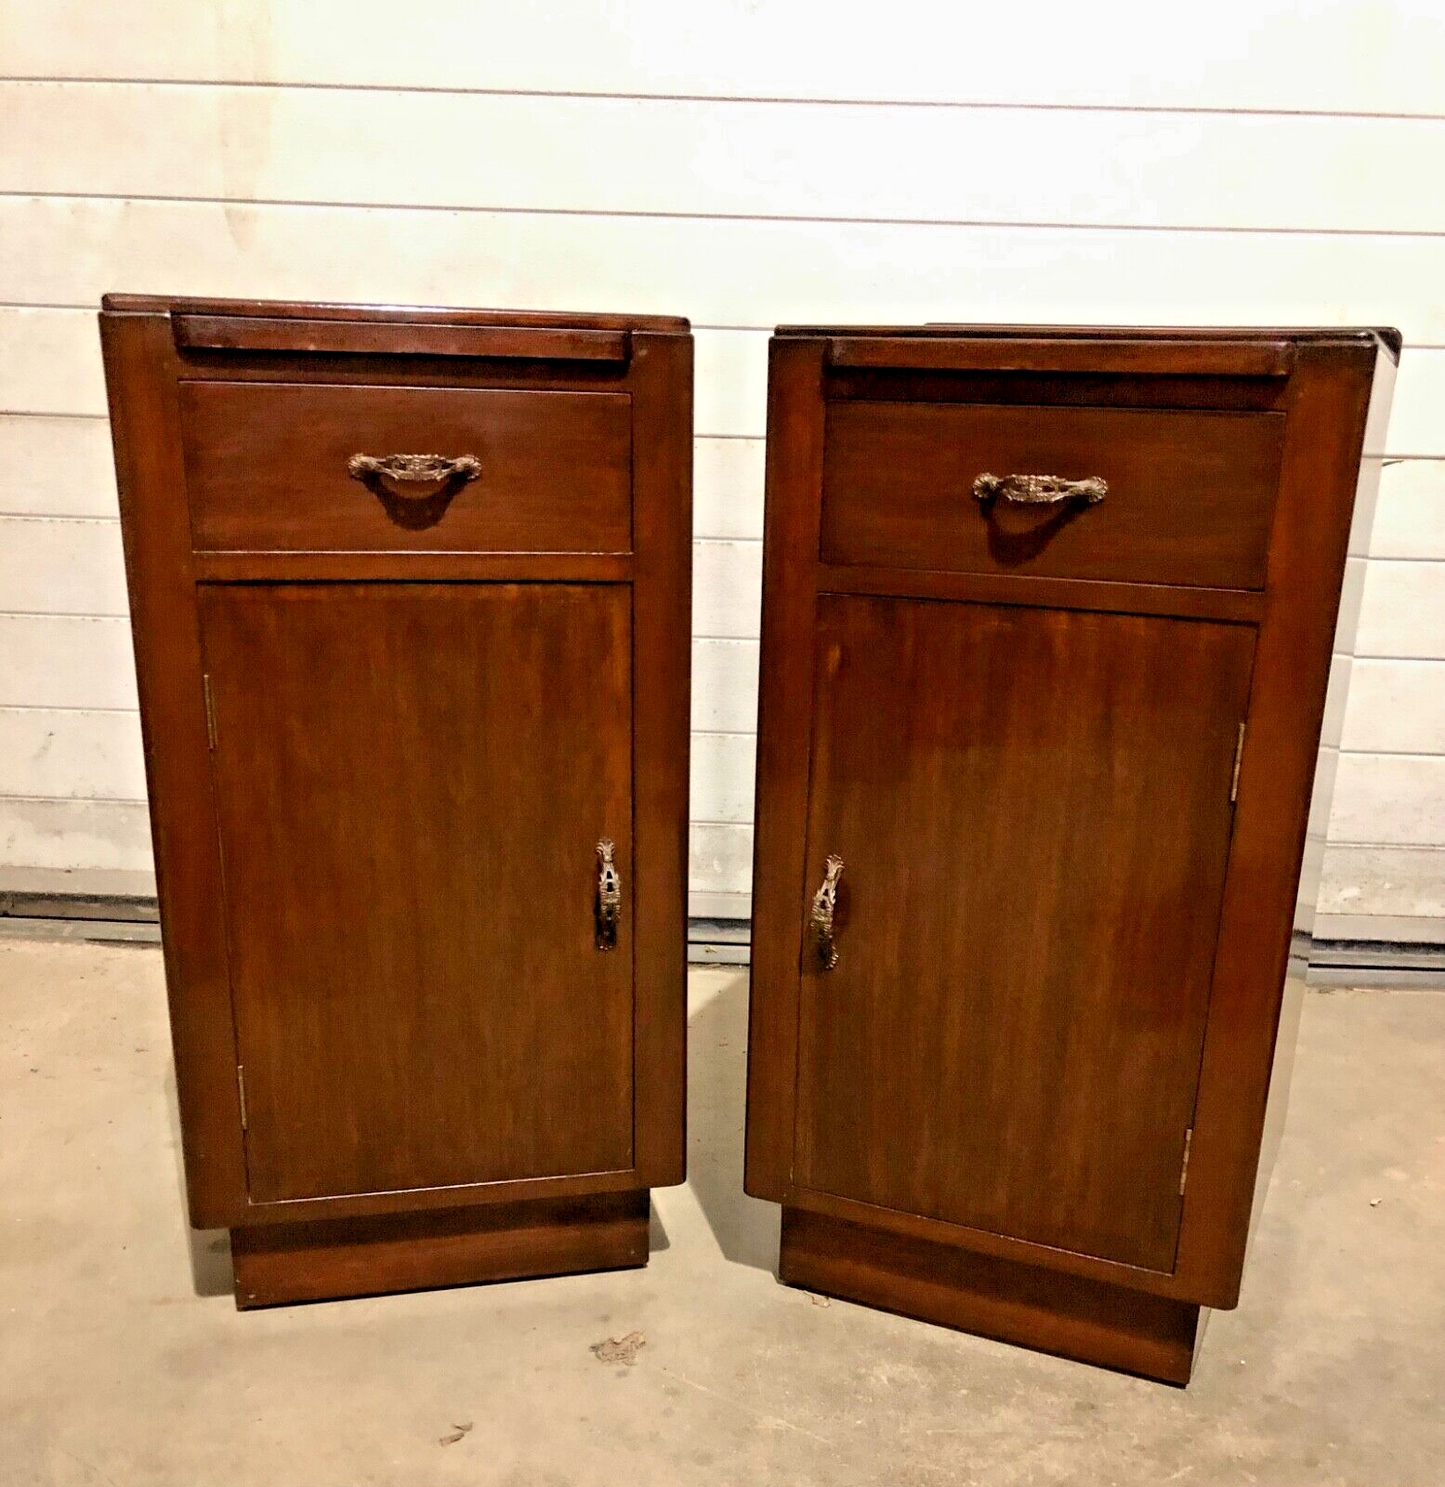 000767....Handsome Pair Of Art Deco Mahogany Bedside Tables / Bedside Cabinets